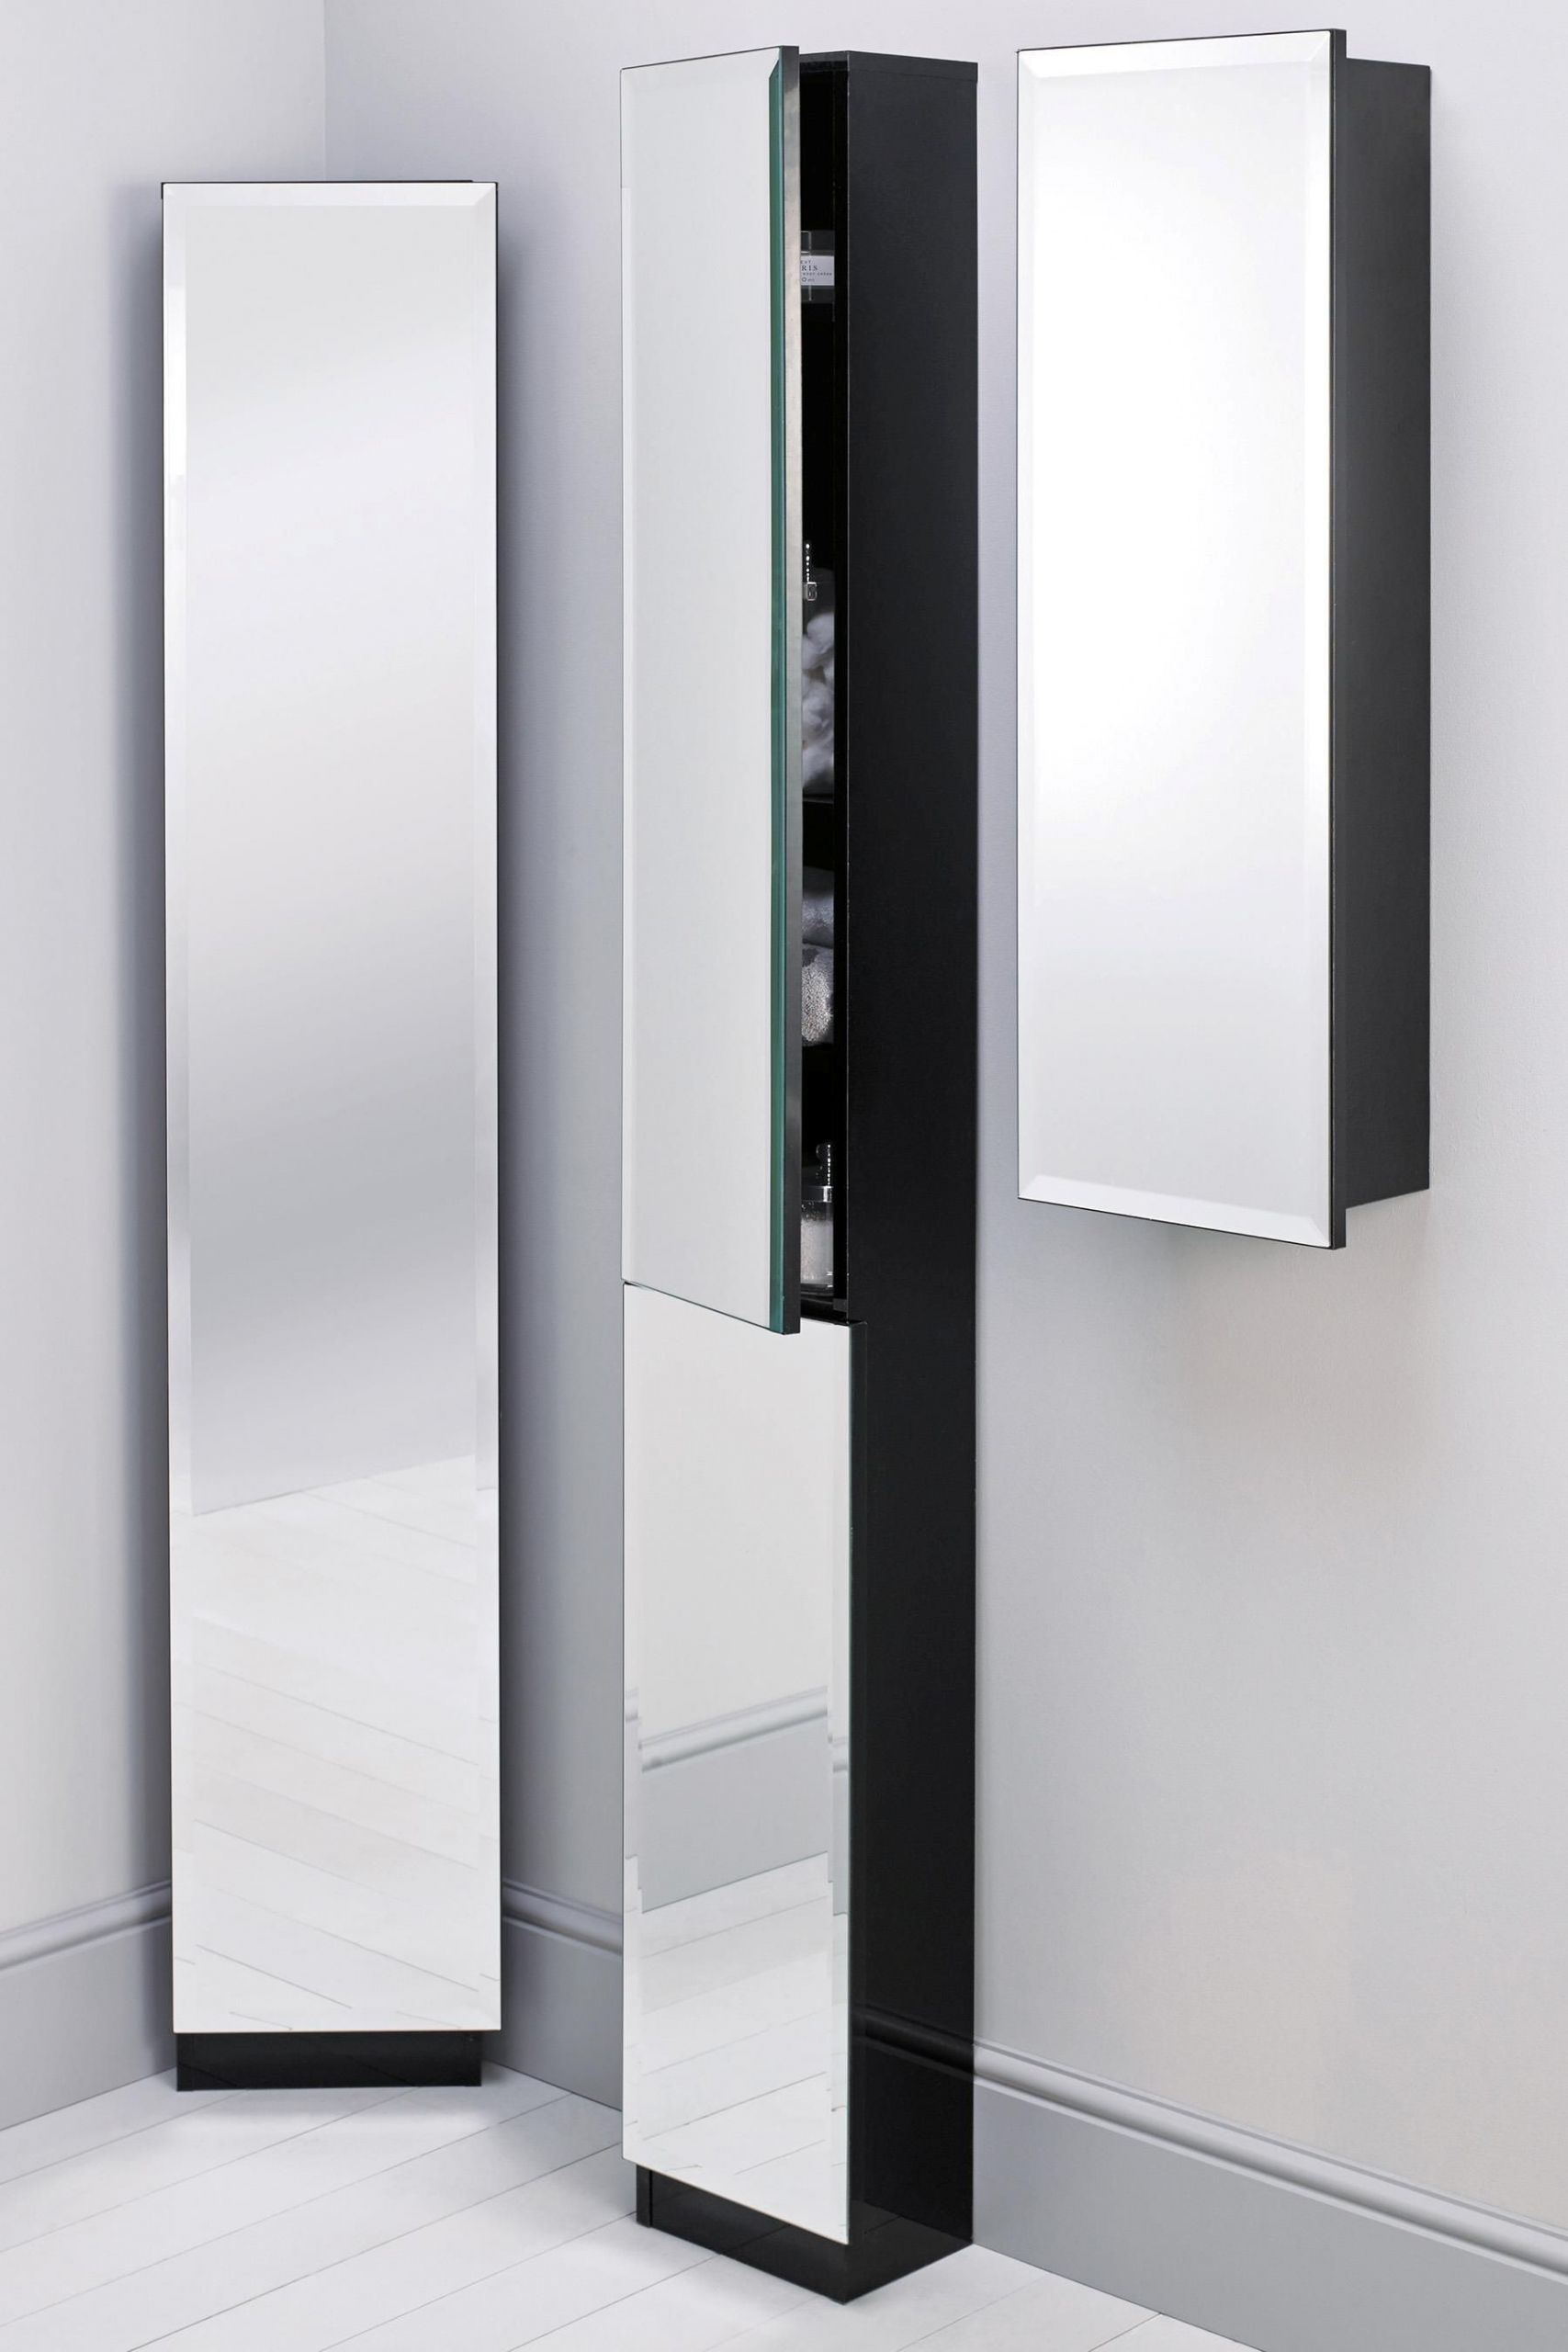 Tall Bathroom Mirror
 Tall Bathroom Cabinet With Mirror Door There are various